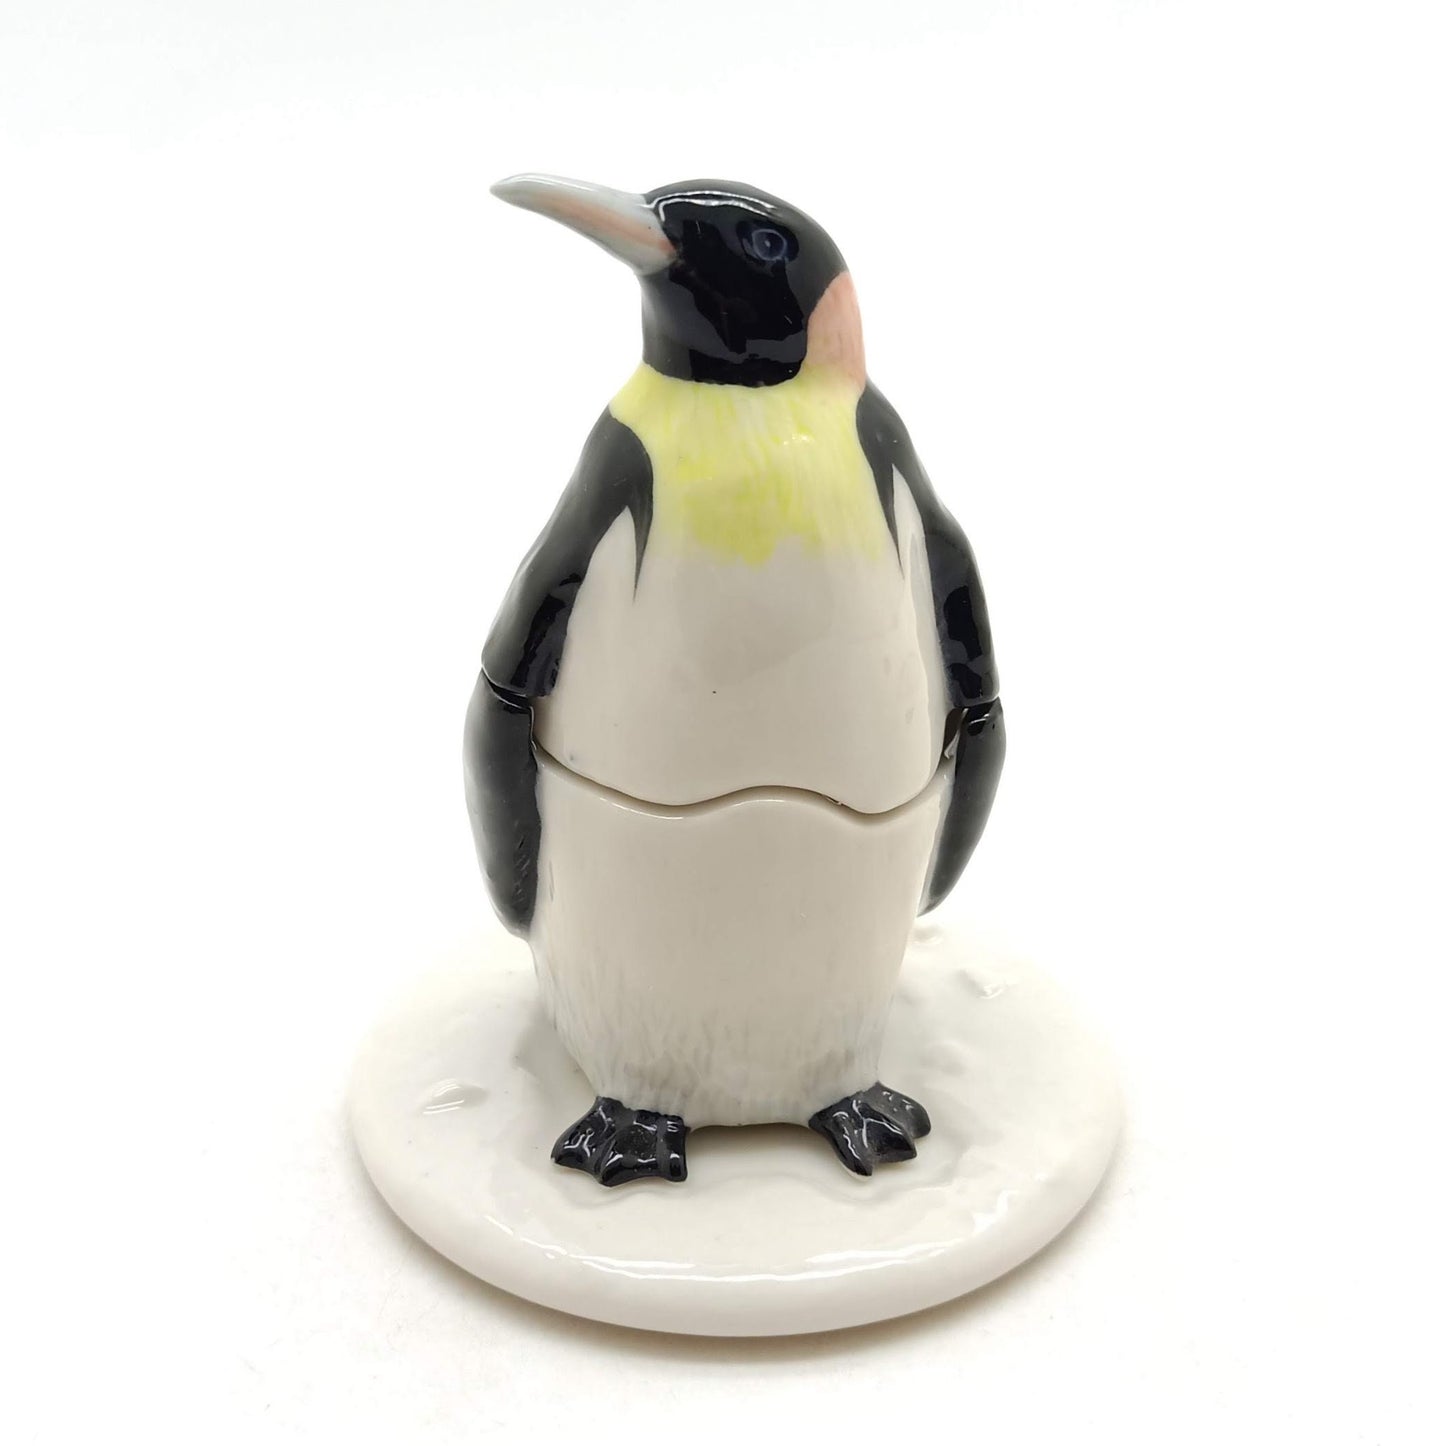 Penguin Figurine Kitchen Ceramic Salt & Pepper Shakers with Tray